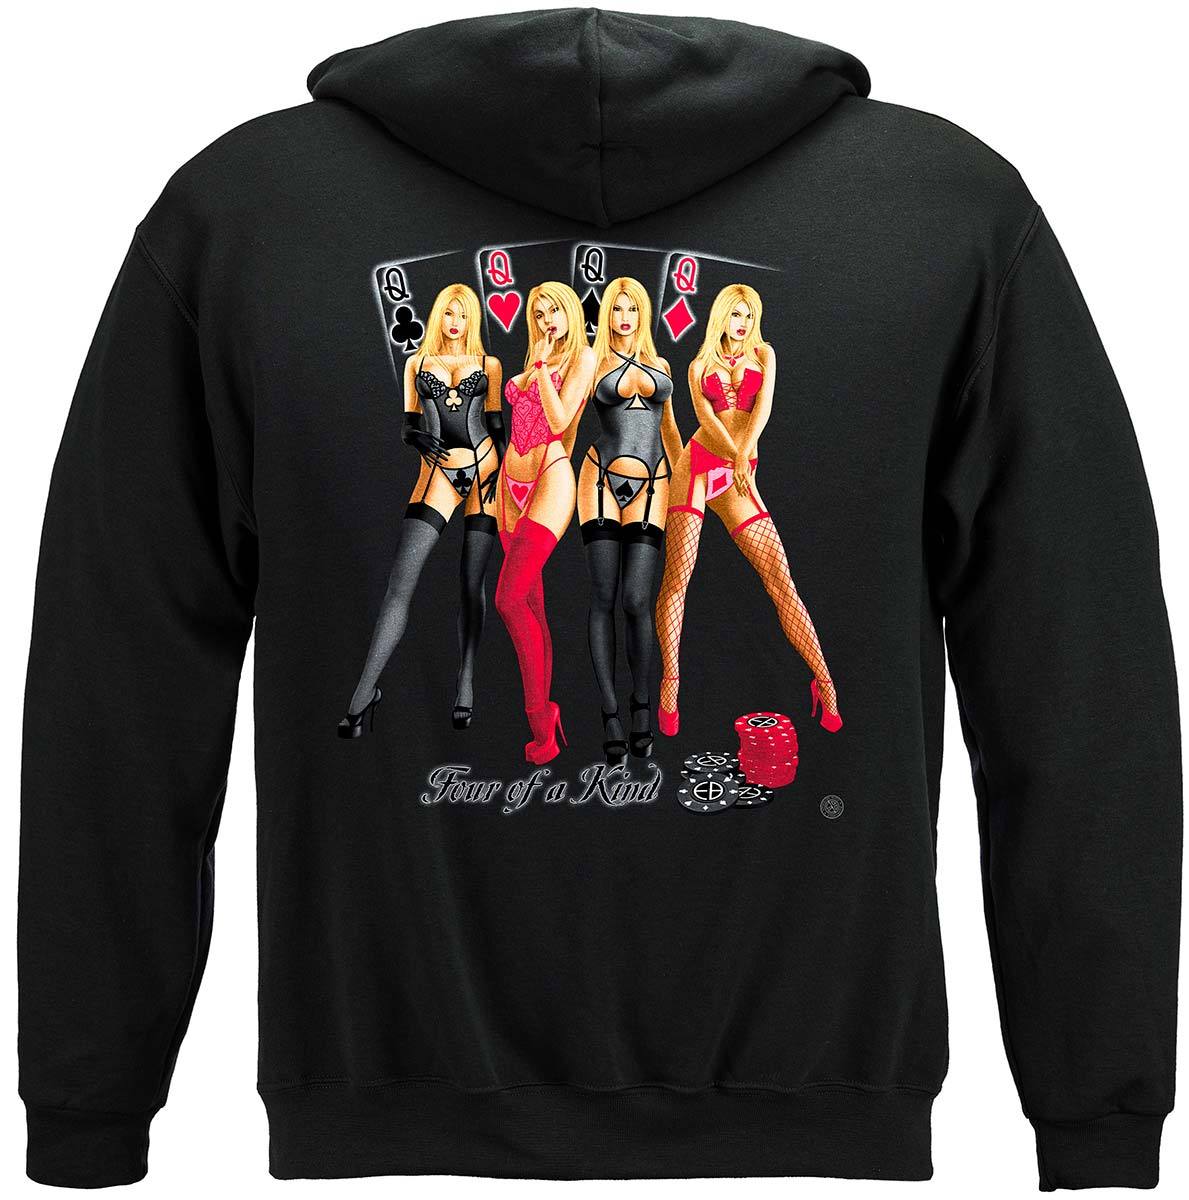 Four Of A Kind Premium Hooded Sweat Shirt